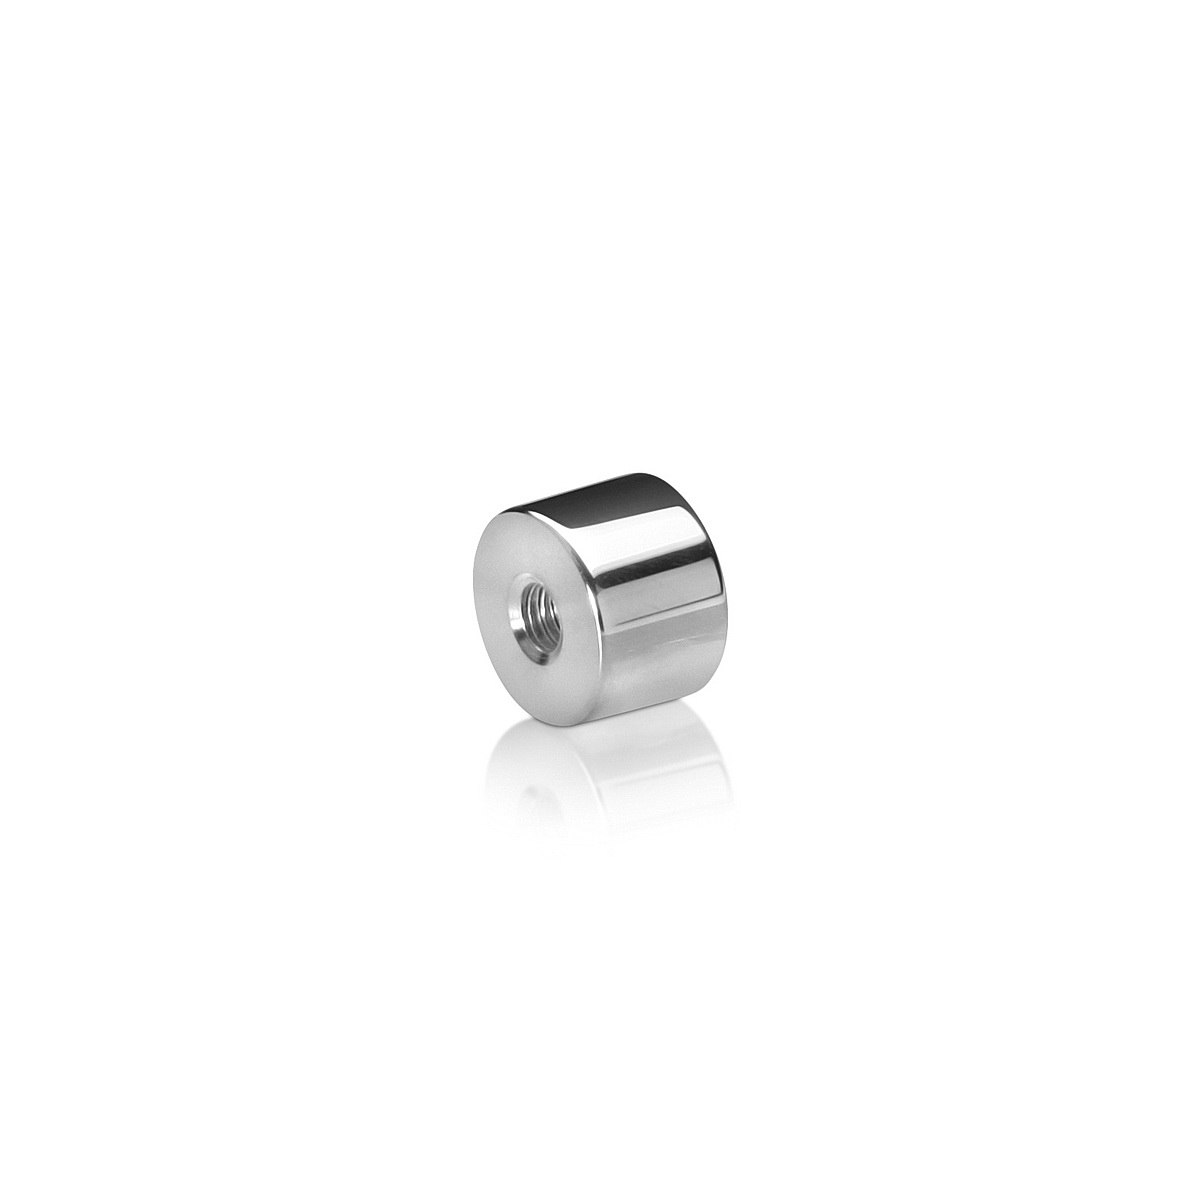 5/16-18 Threaded Barrels Diameter: 3/4'', Length: 1/2'', Polished Finish Grade 304 [Required Material Hole Size: 3/8'' ]